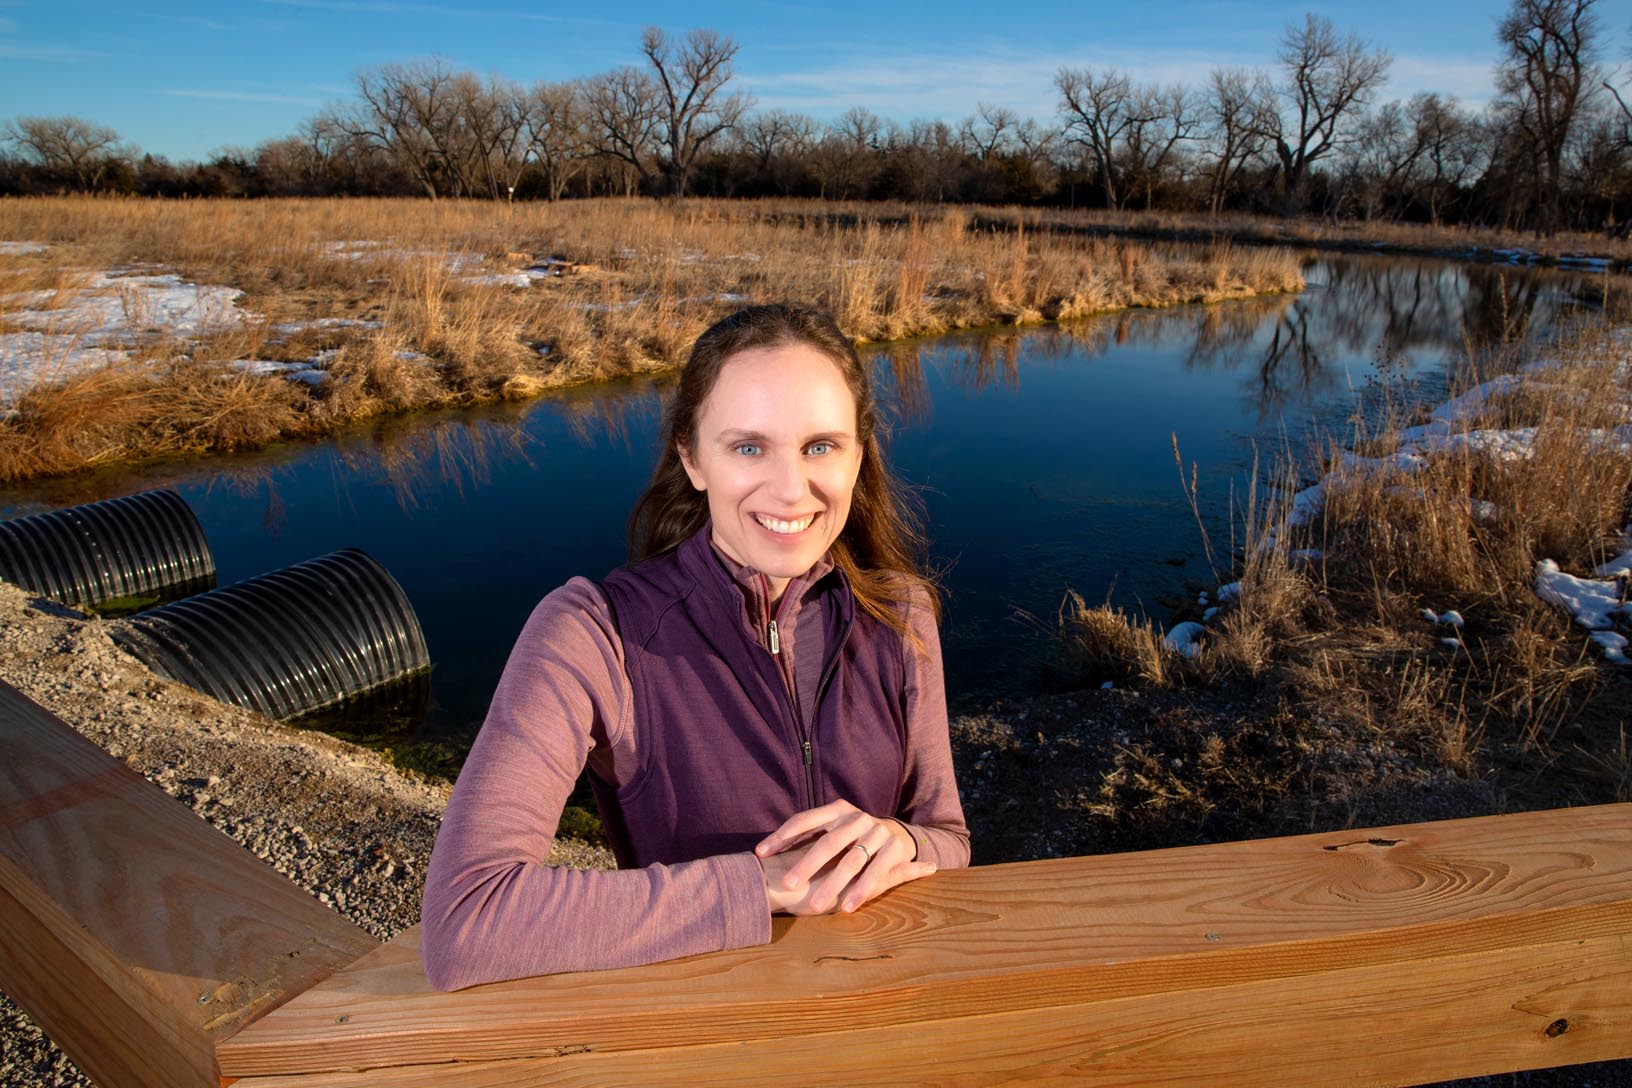 “People are searching for ways to manage rivers to meet societal and ecosystem needs as human populations and demands for freshwater increase globally," says Mary Harner.